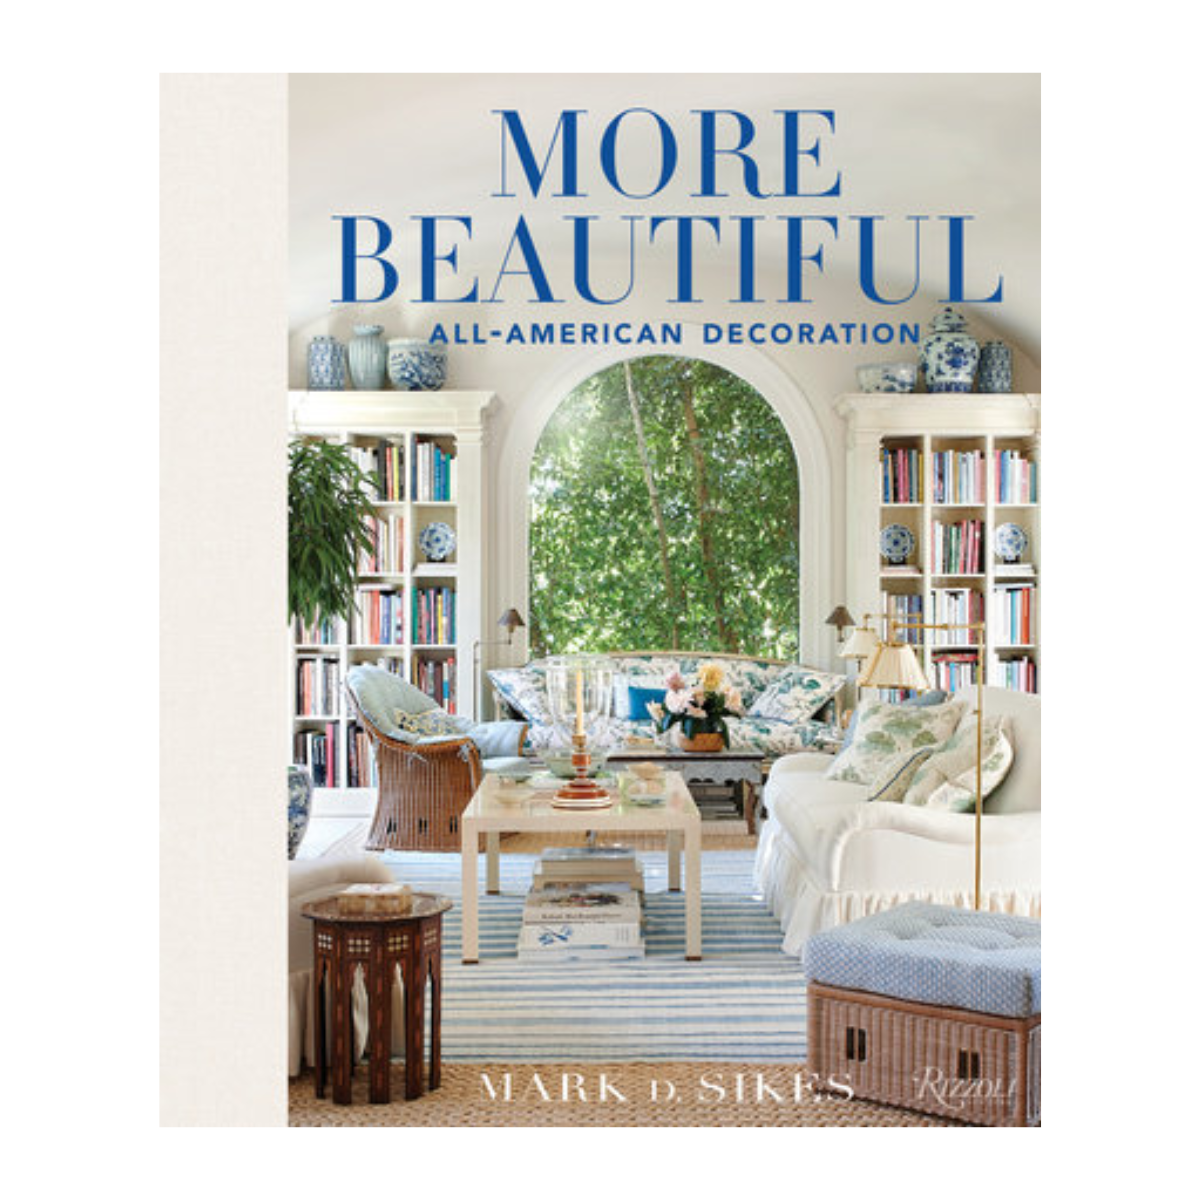 "More Beautiful: All-American Decoration”